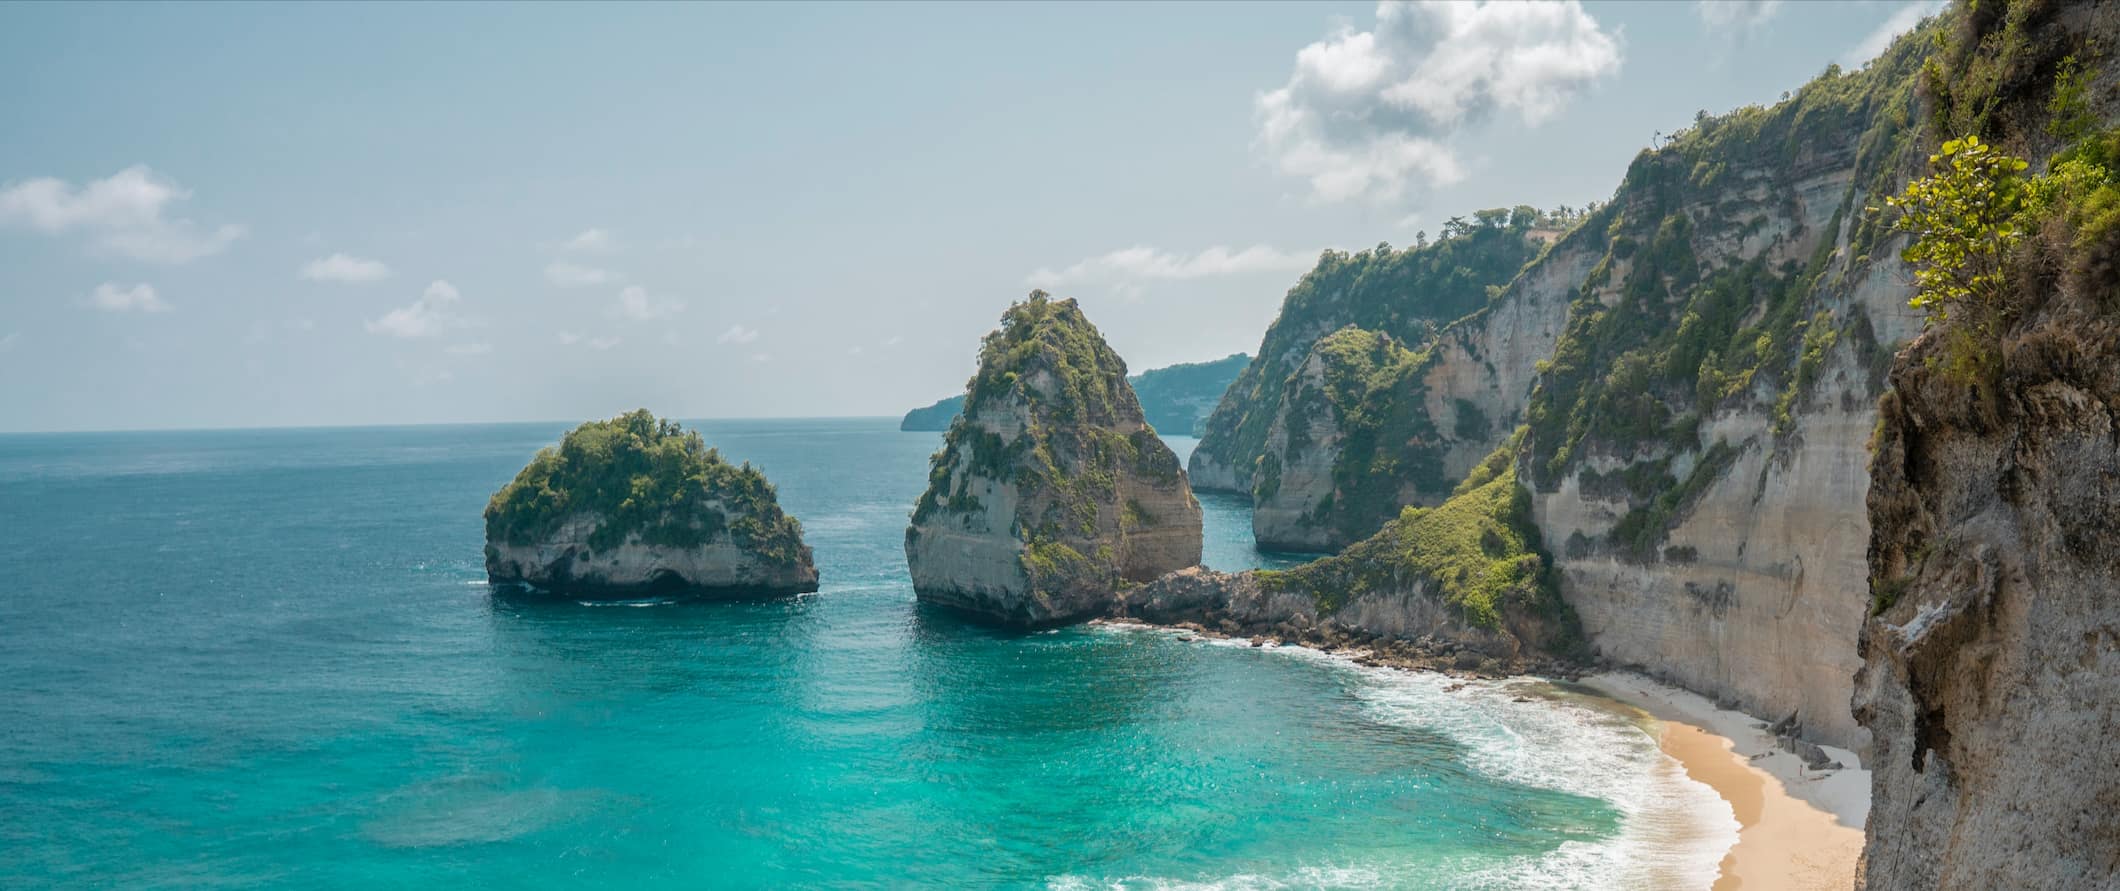 A stunning beach alongside the rugged cliffs and coast of Bali, Indonesia